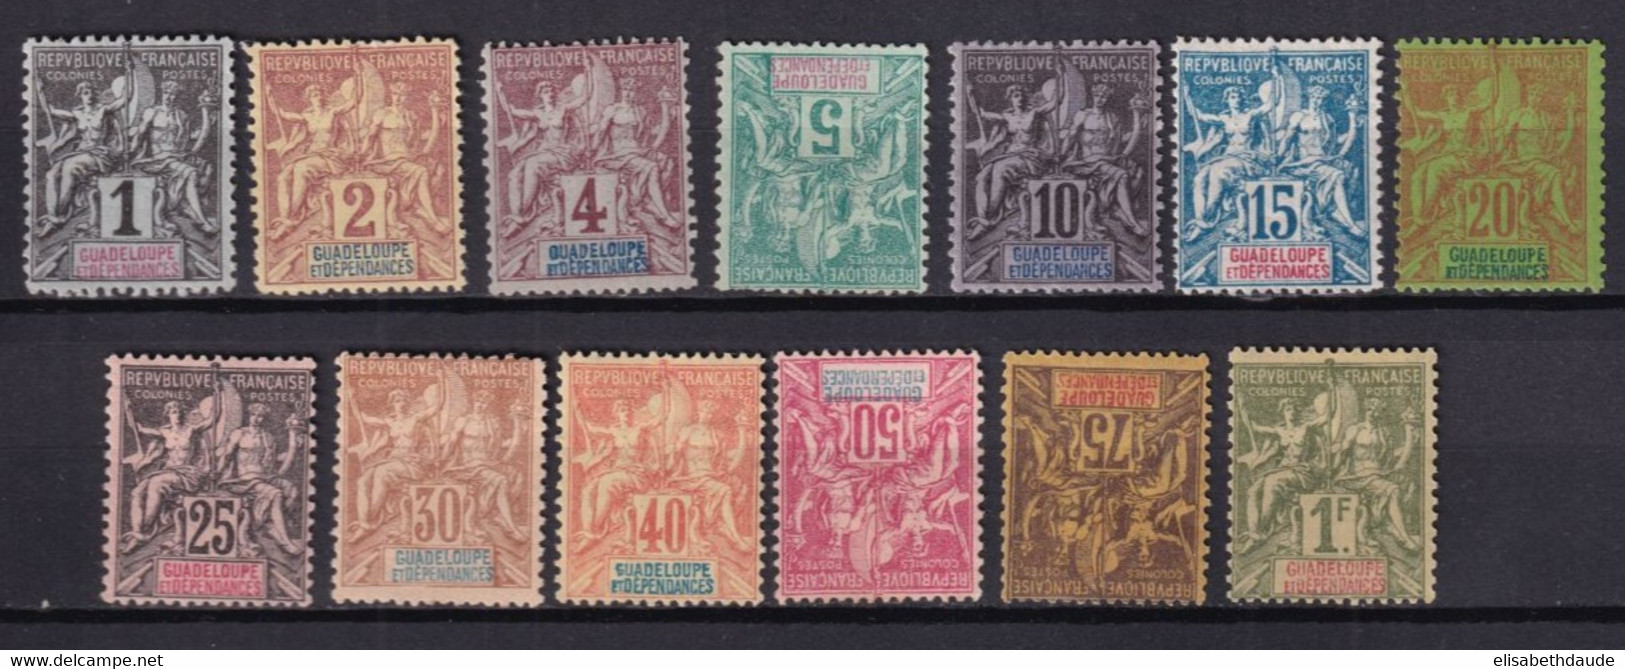 GUADELOUPE - YVERT N° 27/39 * MH - COTE = 275 EUR. - TYPE GROUPE - Unused Stamps